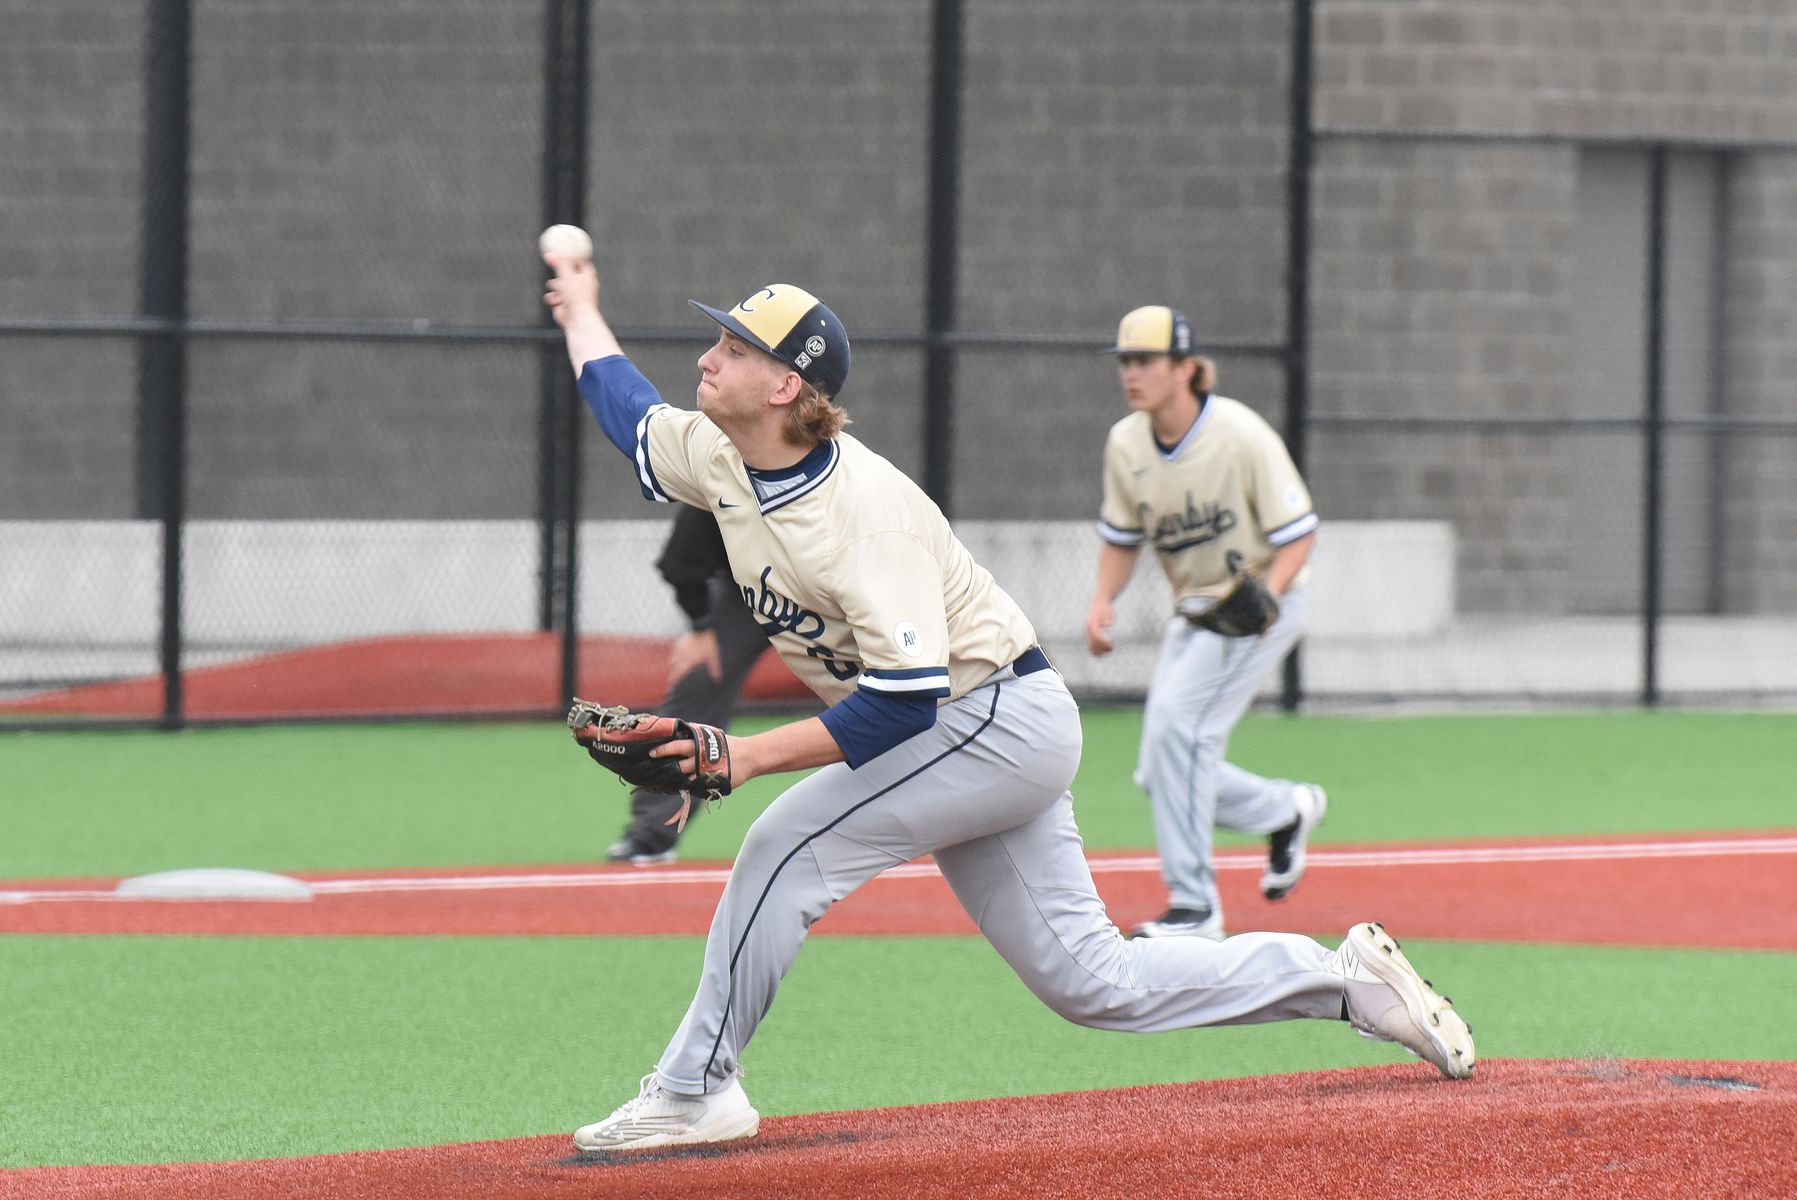 The Canby Cougars and the Mountainside Mustangs compete in an OSAA Class 6A baseball quarterfinal game on Friday, May 27, 2022 at Mountainside High School.